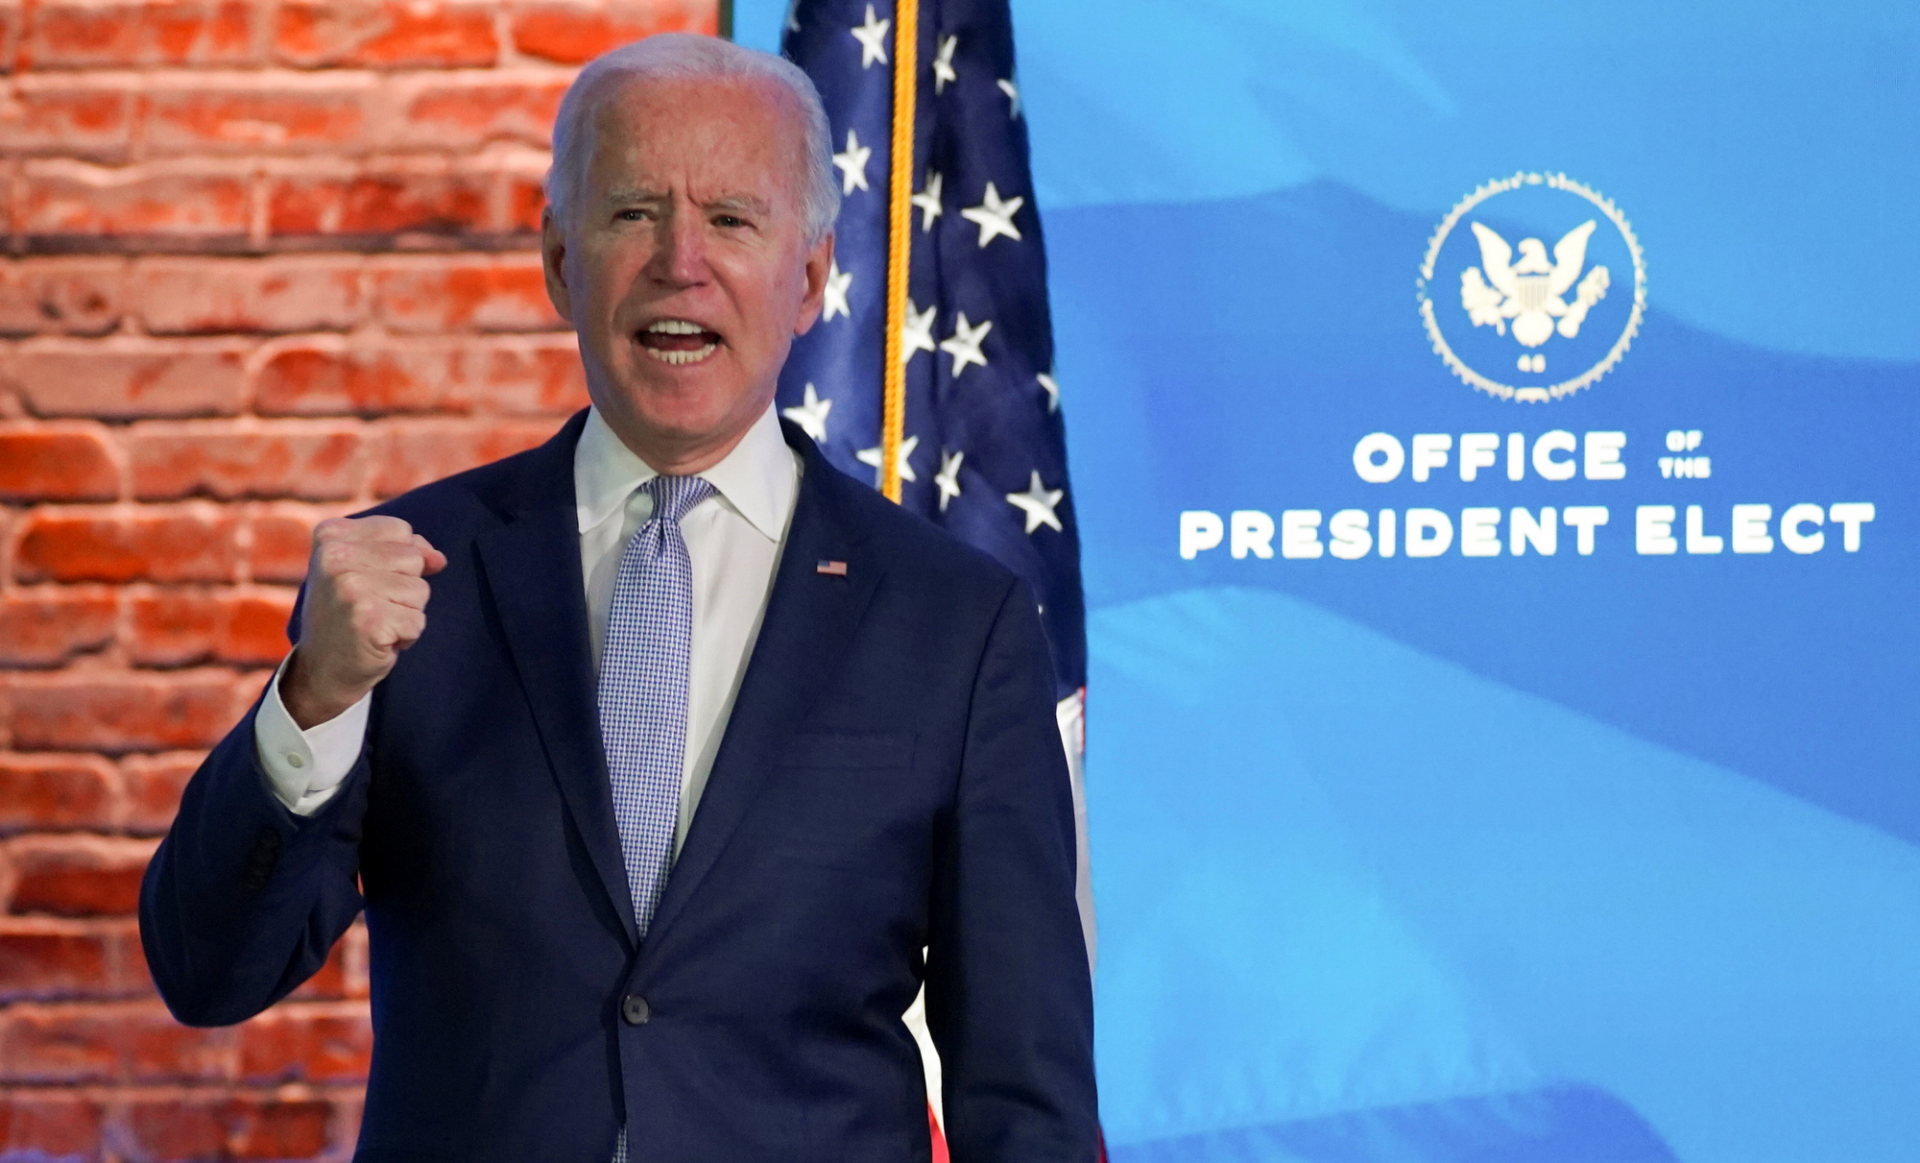 biden is certified victory by us congress trump pledges orderly transition on jan 20